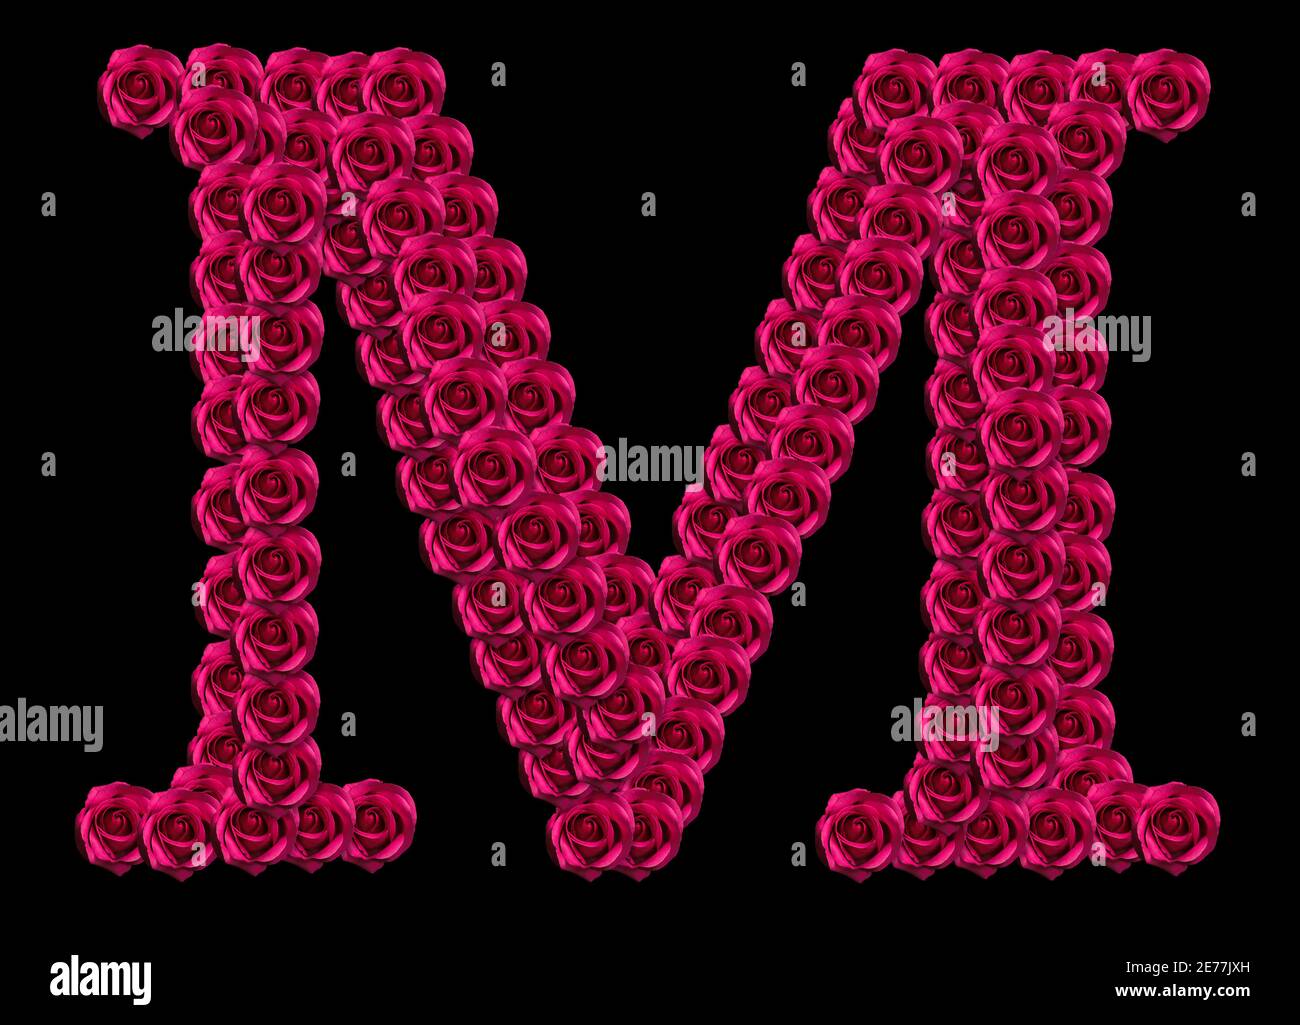 romantic concept image of a capital letter M made of red roses ...